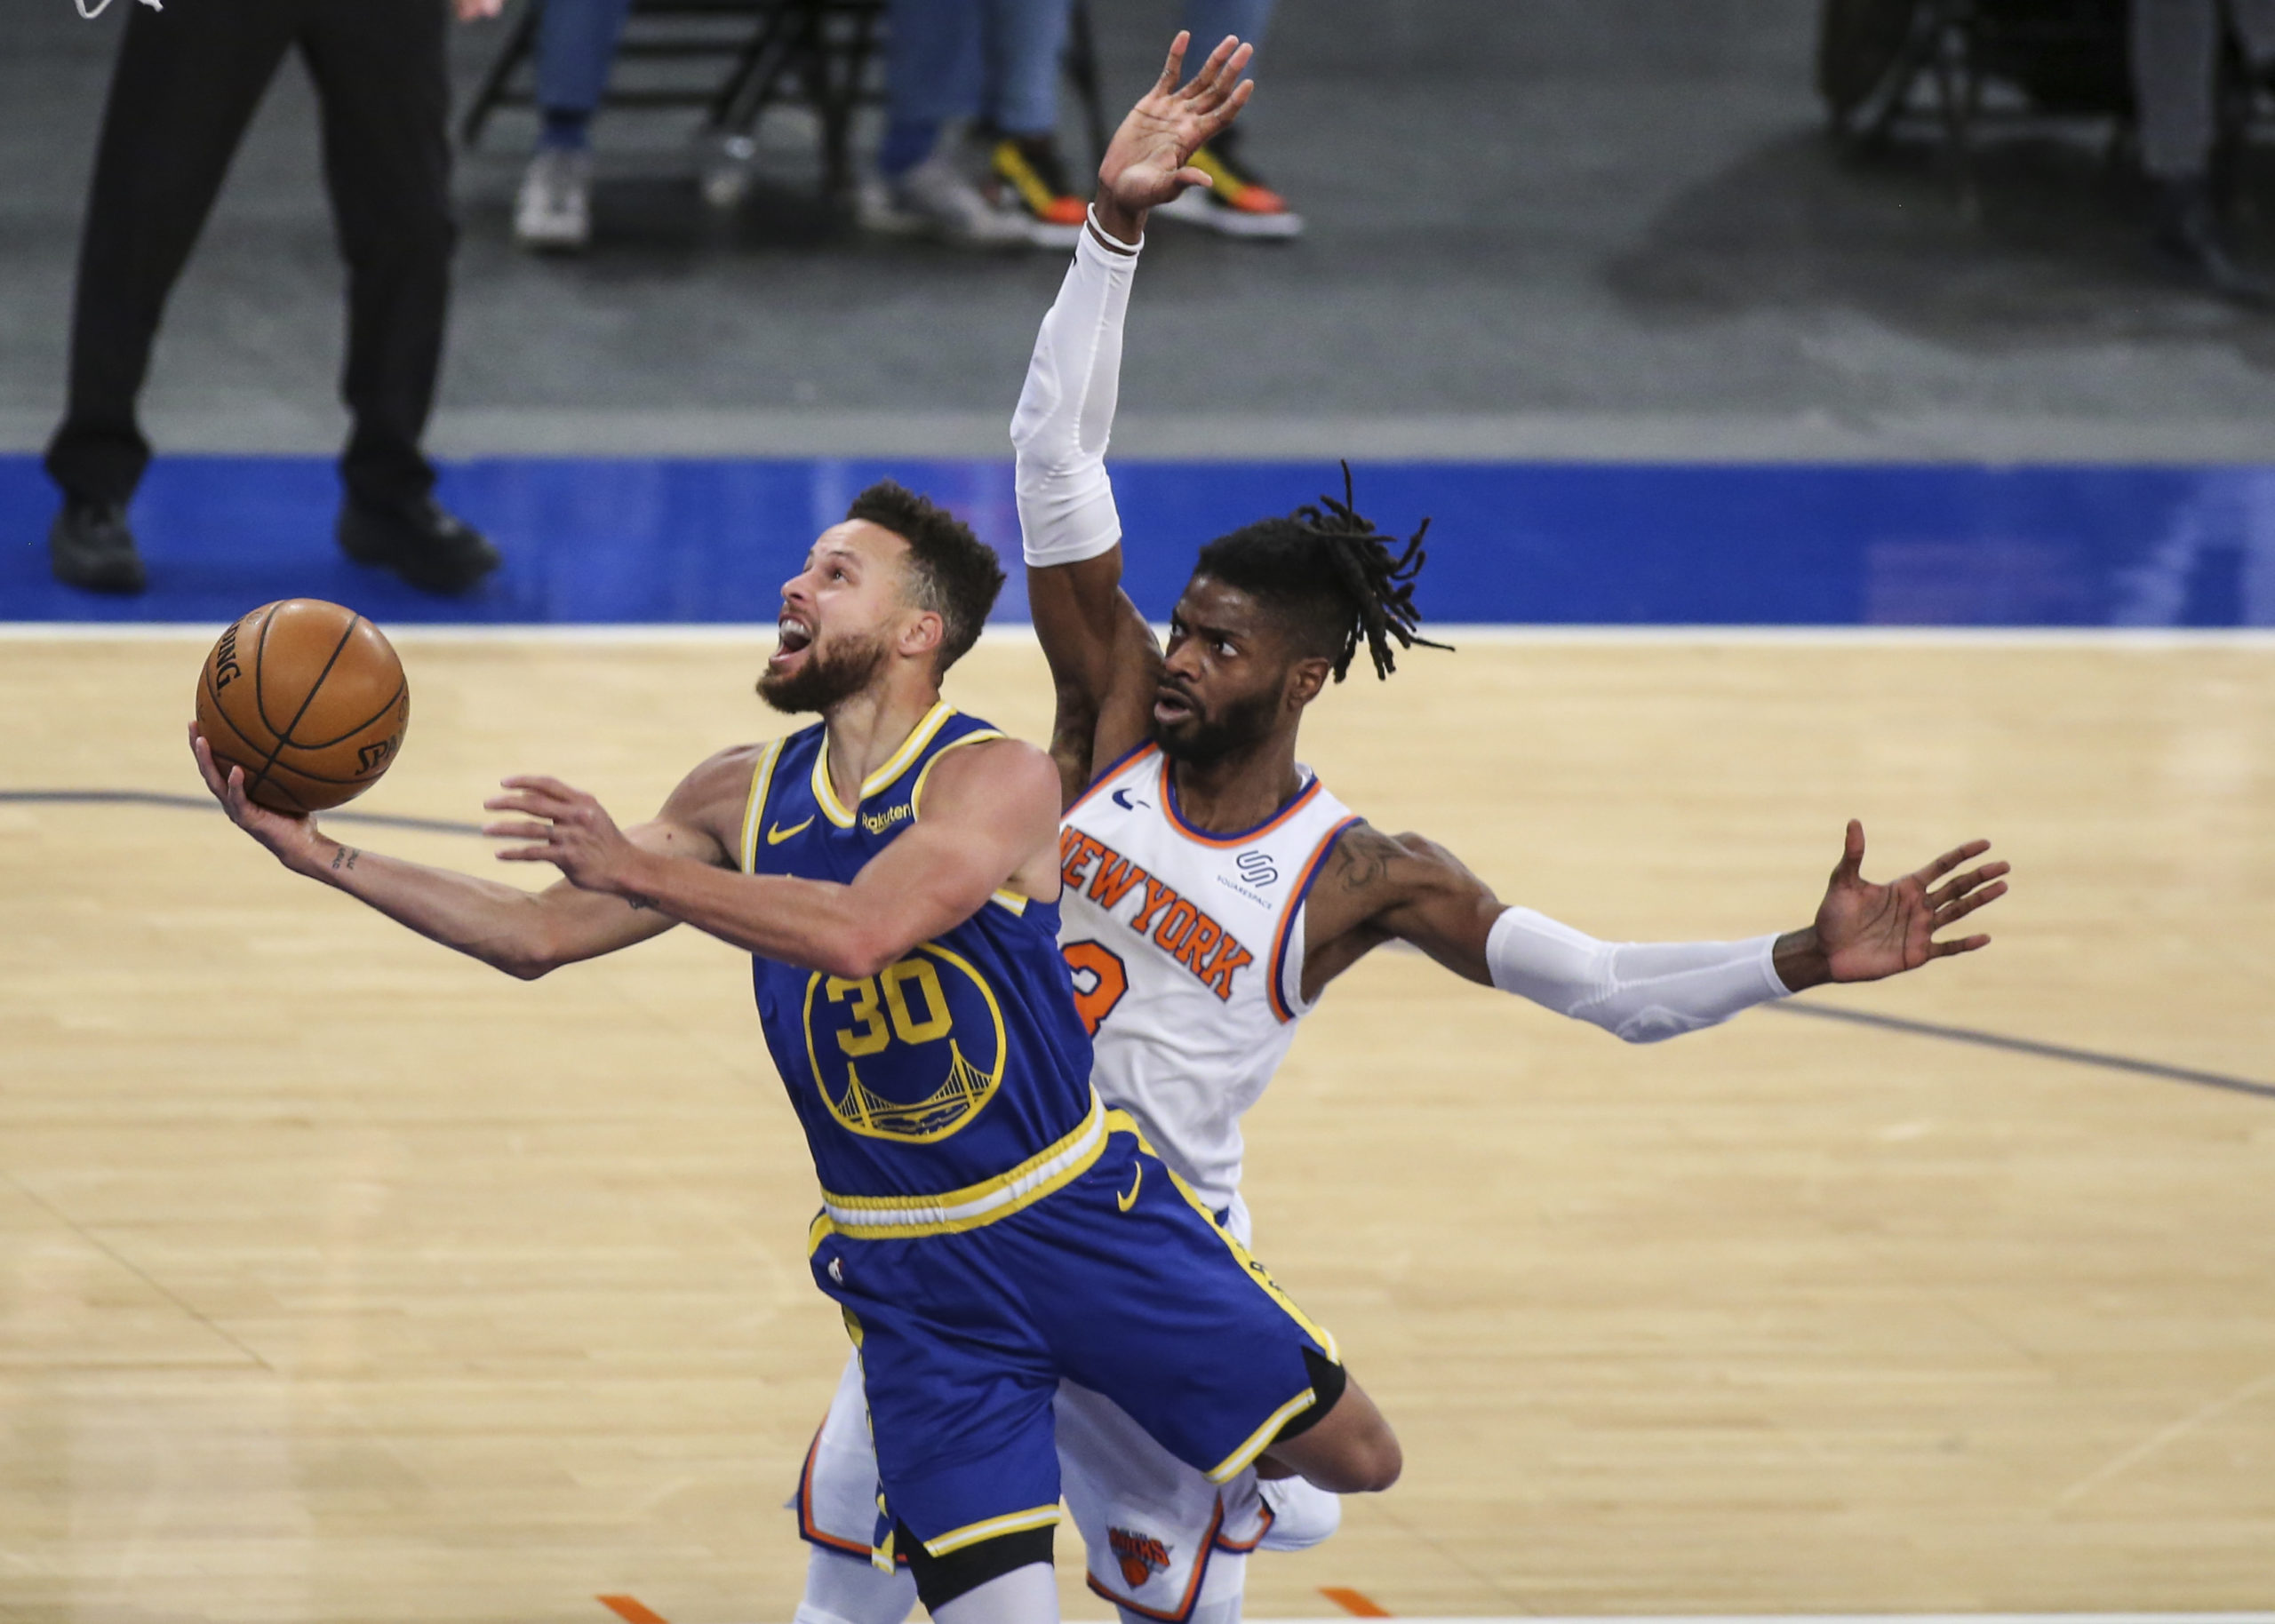 Steph Curry drops 37 as Warriors stop Knicks | Inquirer Sports